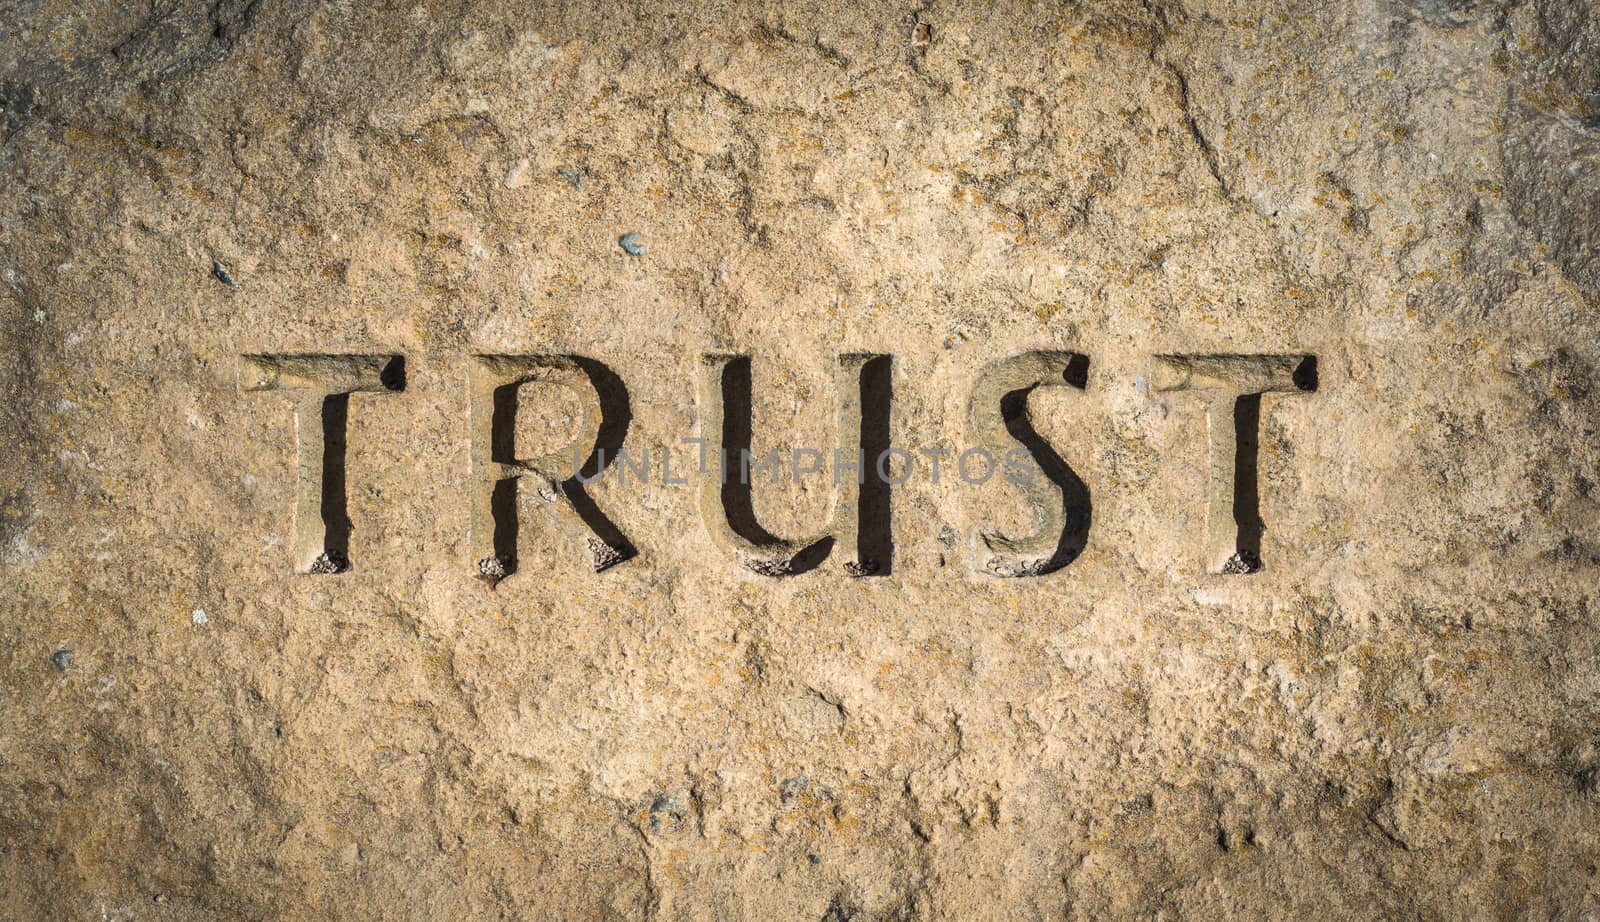 Conceptual Image Of The Word Trust Chiselled Into Stone Or Rock